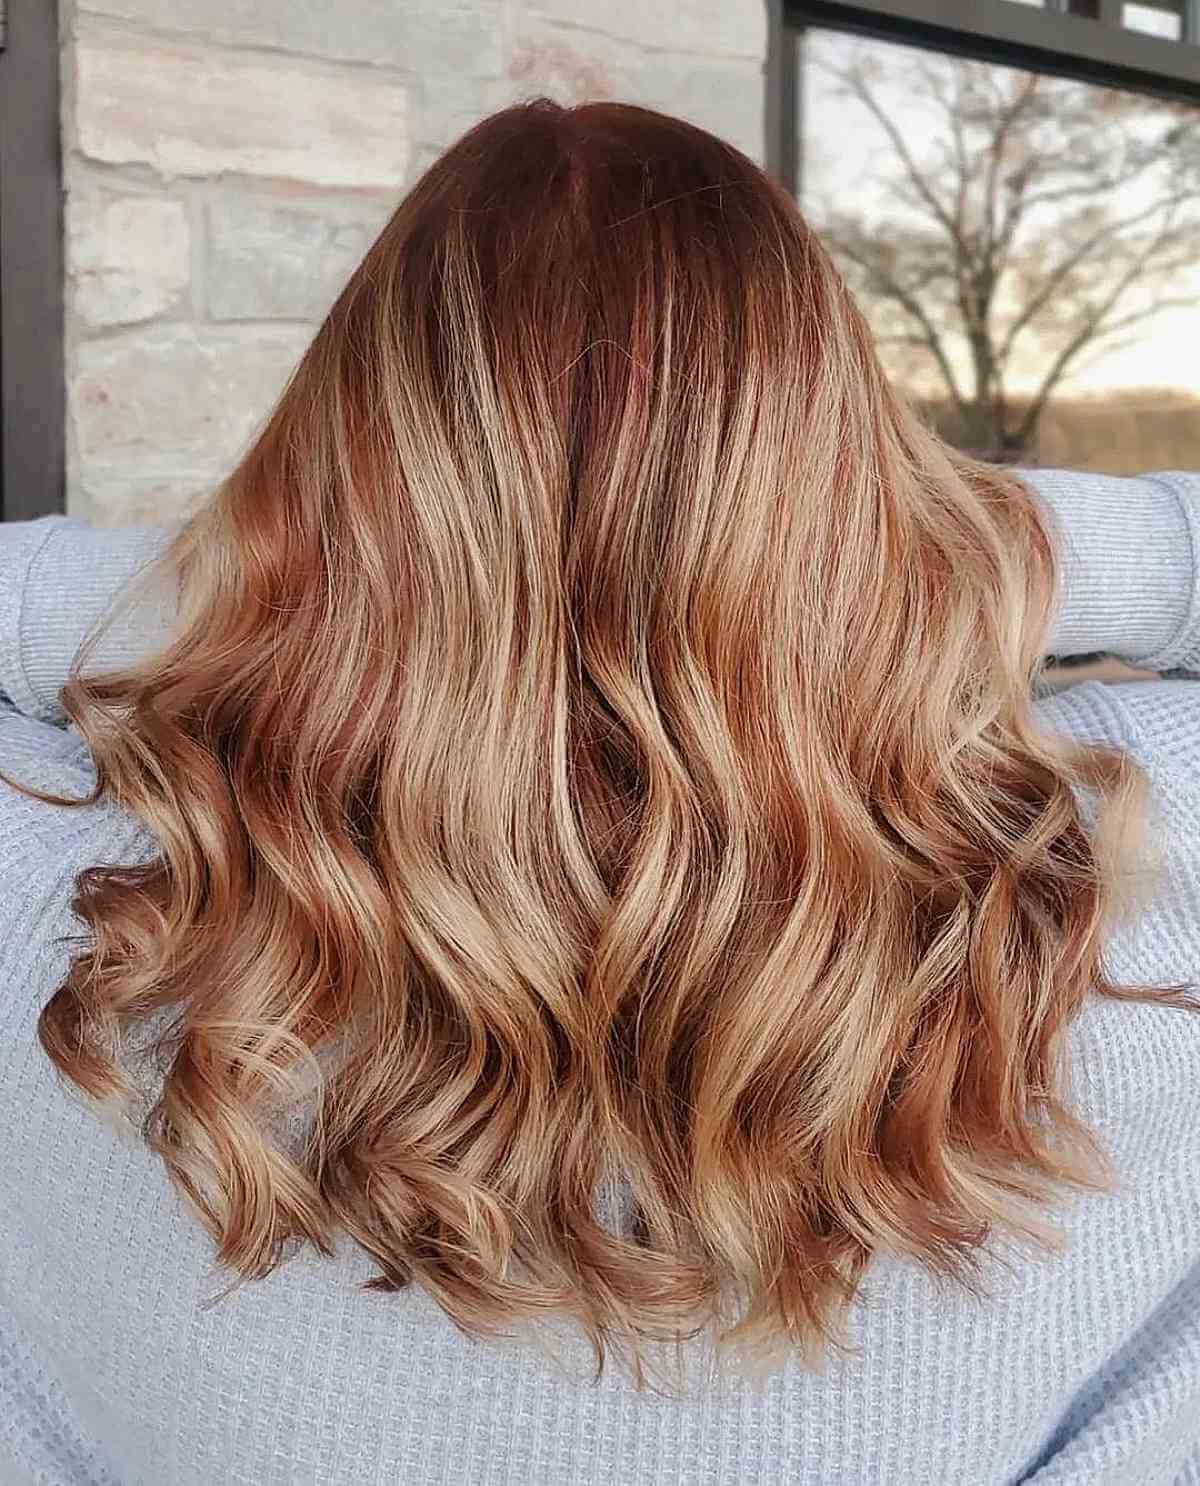 20 Best Light Strawberry Blonde Hair Color Ideas to Match Your Skin Tone